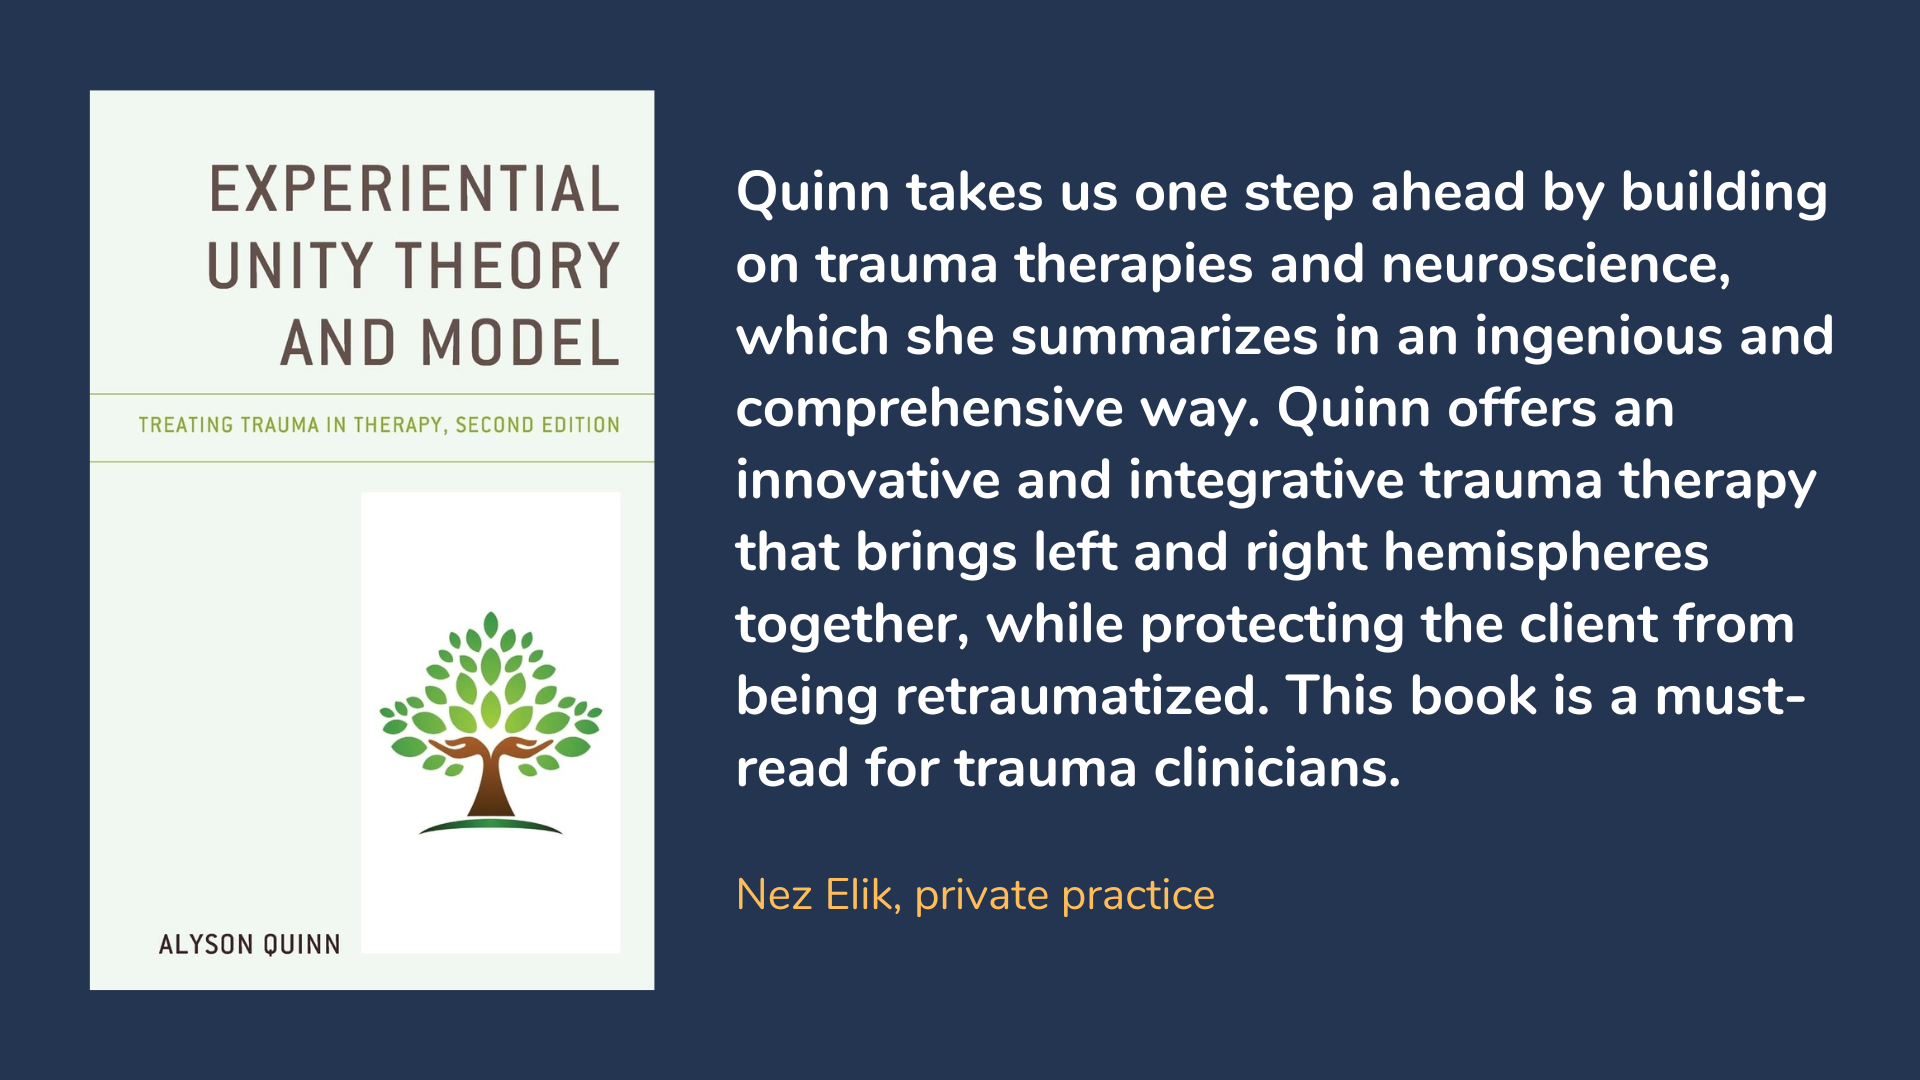 Experiential Unity Theory and Model: Treating Trauma in Therapy, book cover and description